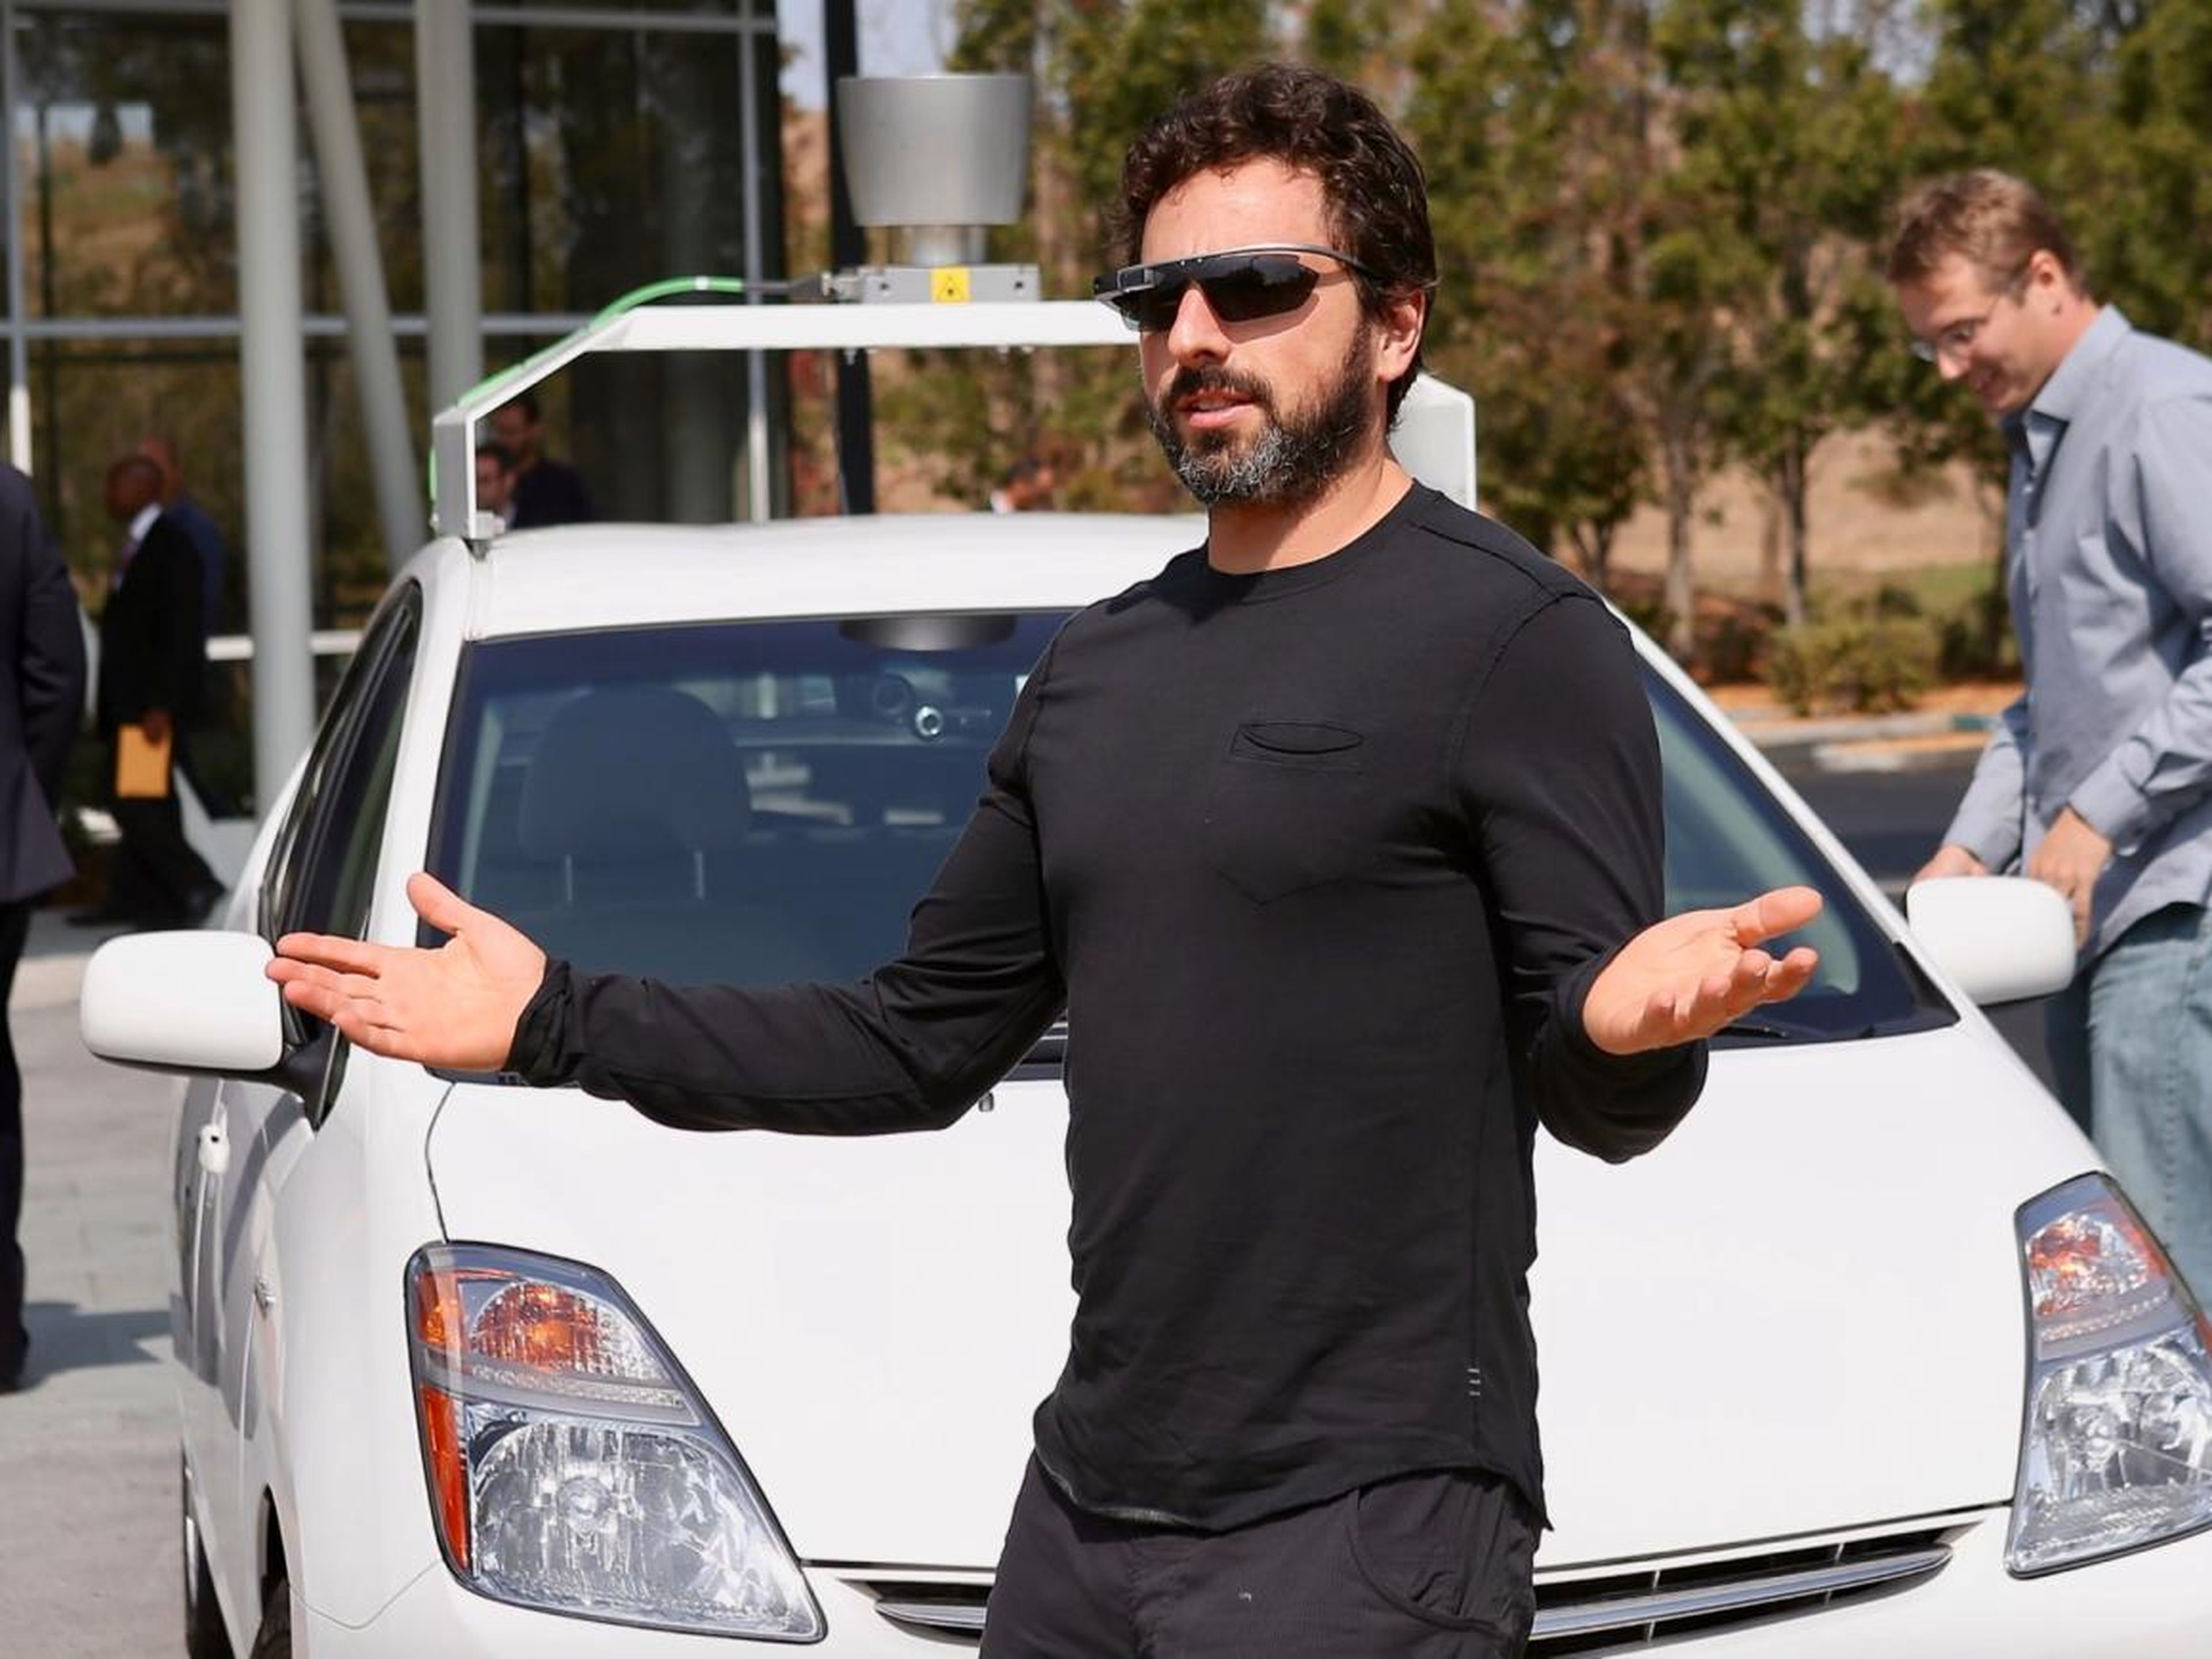 Sergey Brin, cofounder of Google, which has come under fire from employees for reportedly considering launching a censored version of its search engine in China.